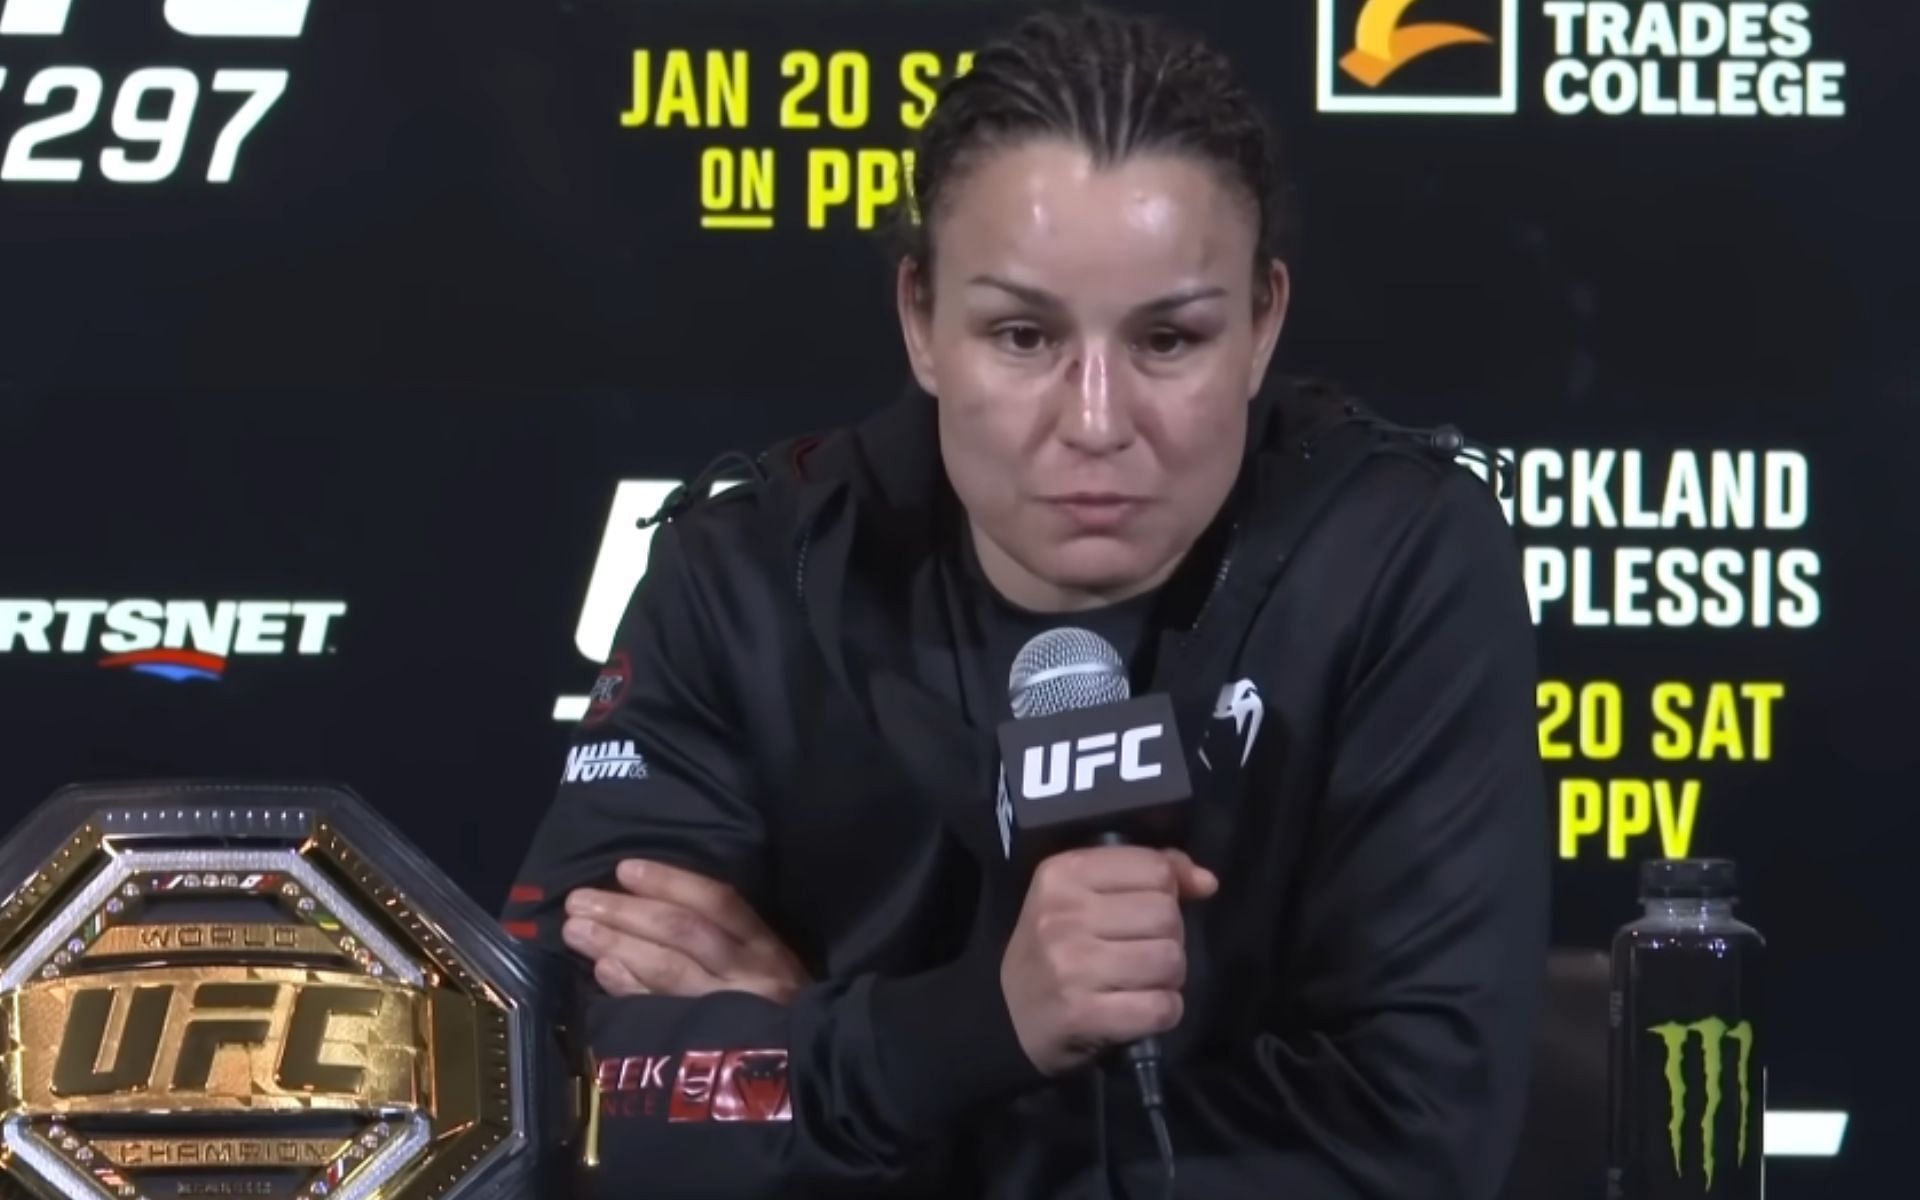 A UFC champion [Raquel Pennington, pictured] clapped back at a ESPN analyst [Image courtesy: UFC - YouTube]